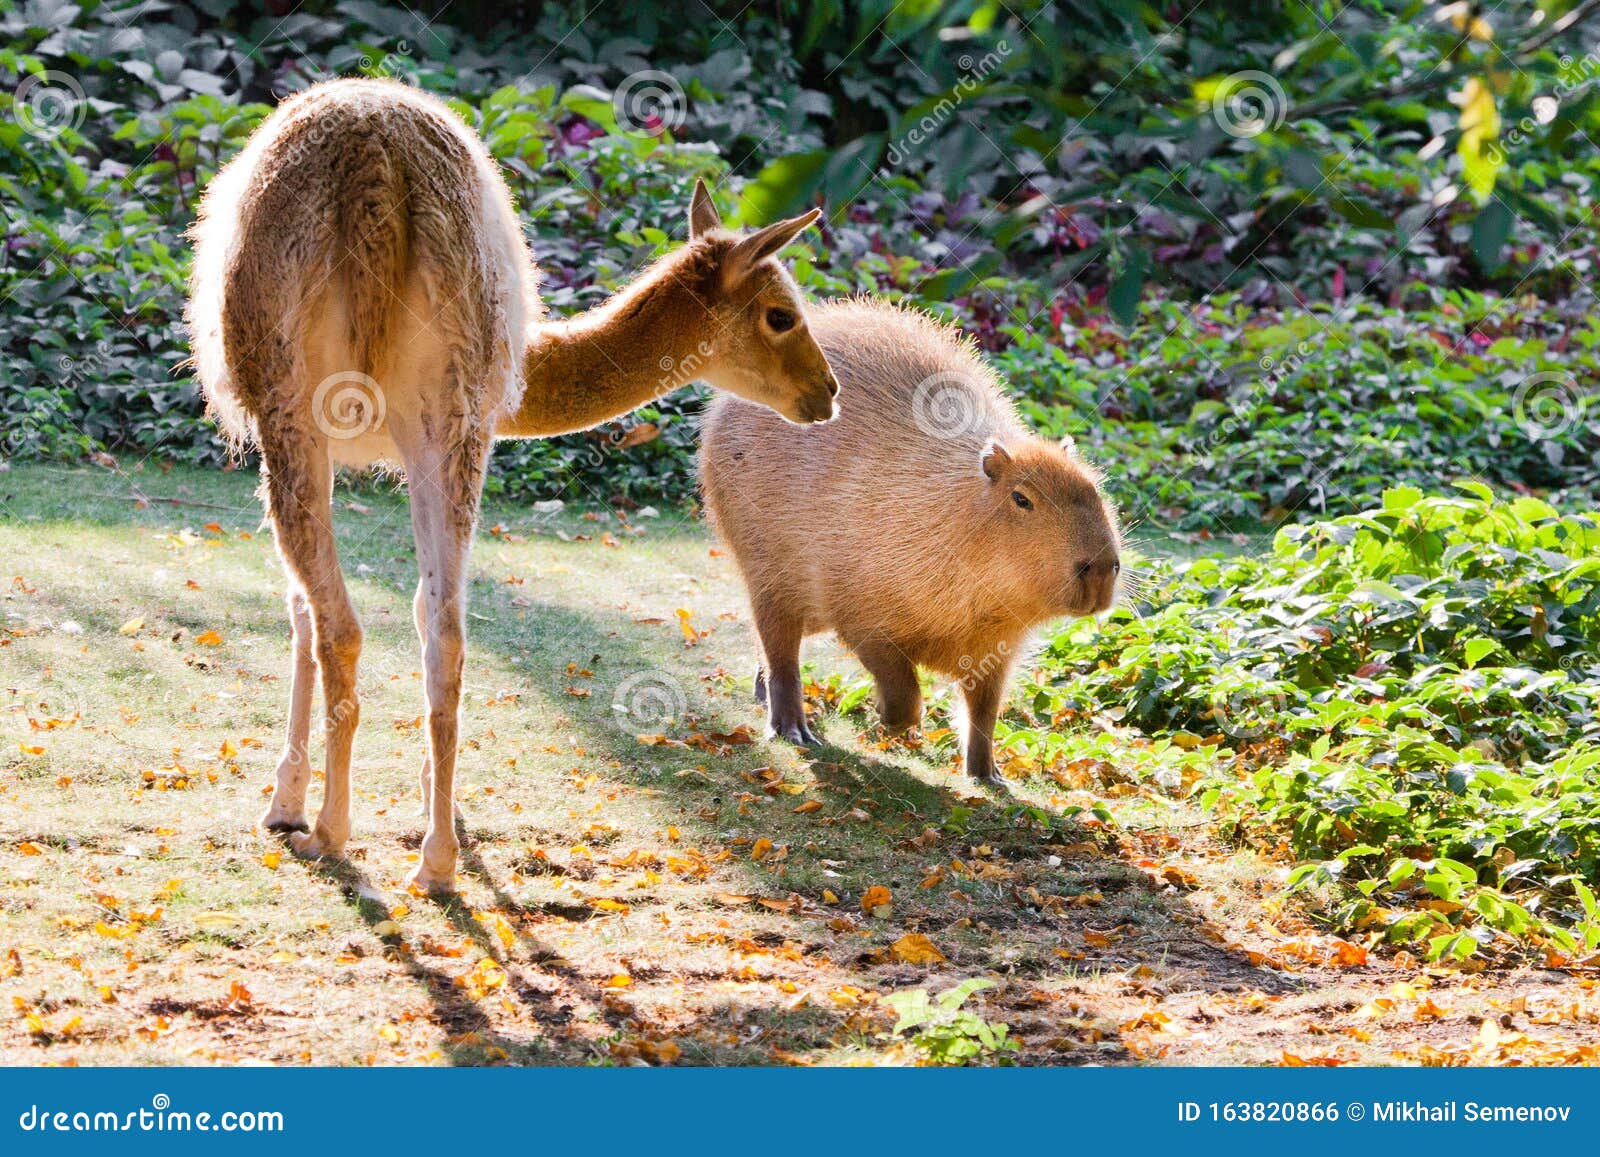 Llama and Capybara - Animal Symbols of South and Latin America Graze  Peacefully on a Green Lawn Stock Photo - Image of sunset, lace: 163820866